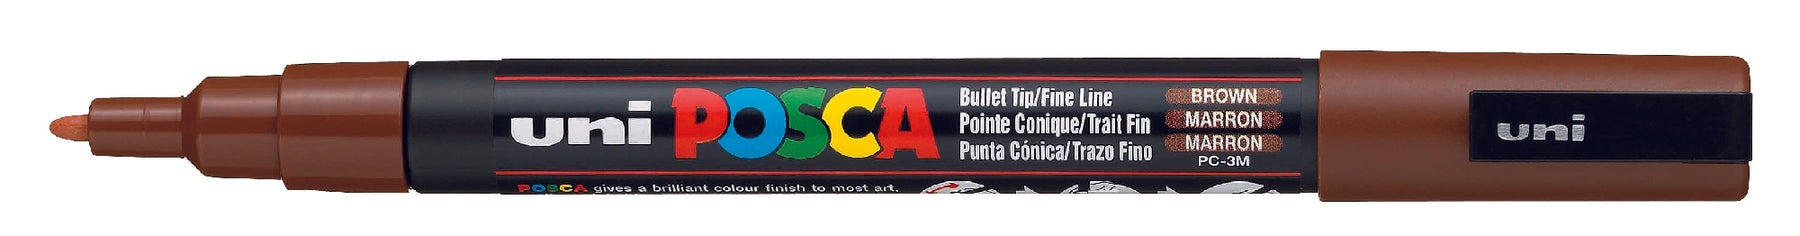 POSCA PAINT MARKER PC3M BULLET SHAPED BROWN - PC3MBRN